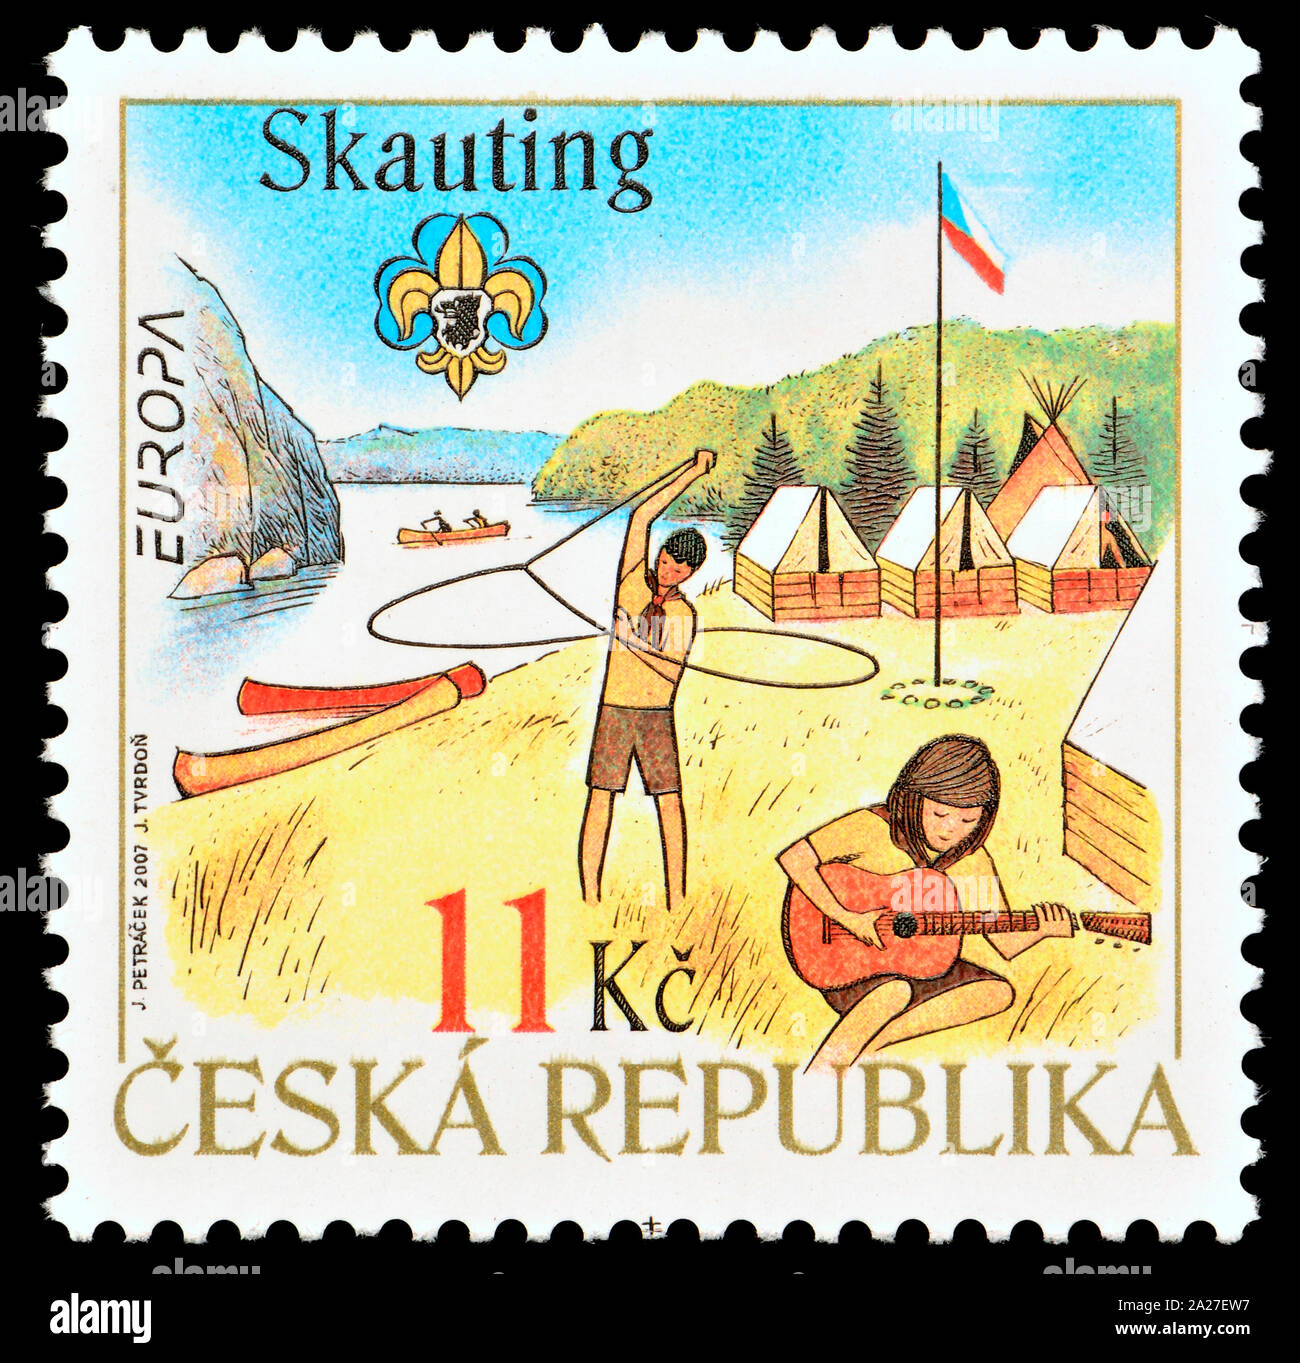 Czech Republic postage stamp (2007) - Scouting (Czech spelling) Stock Photo